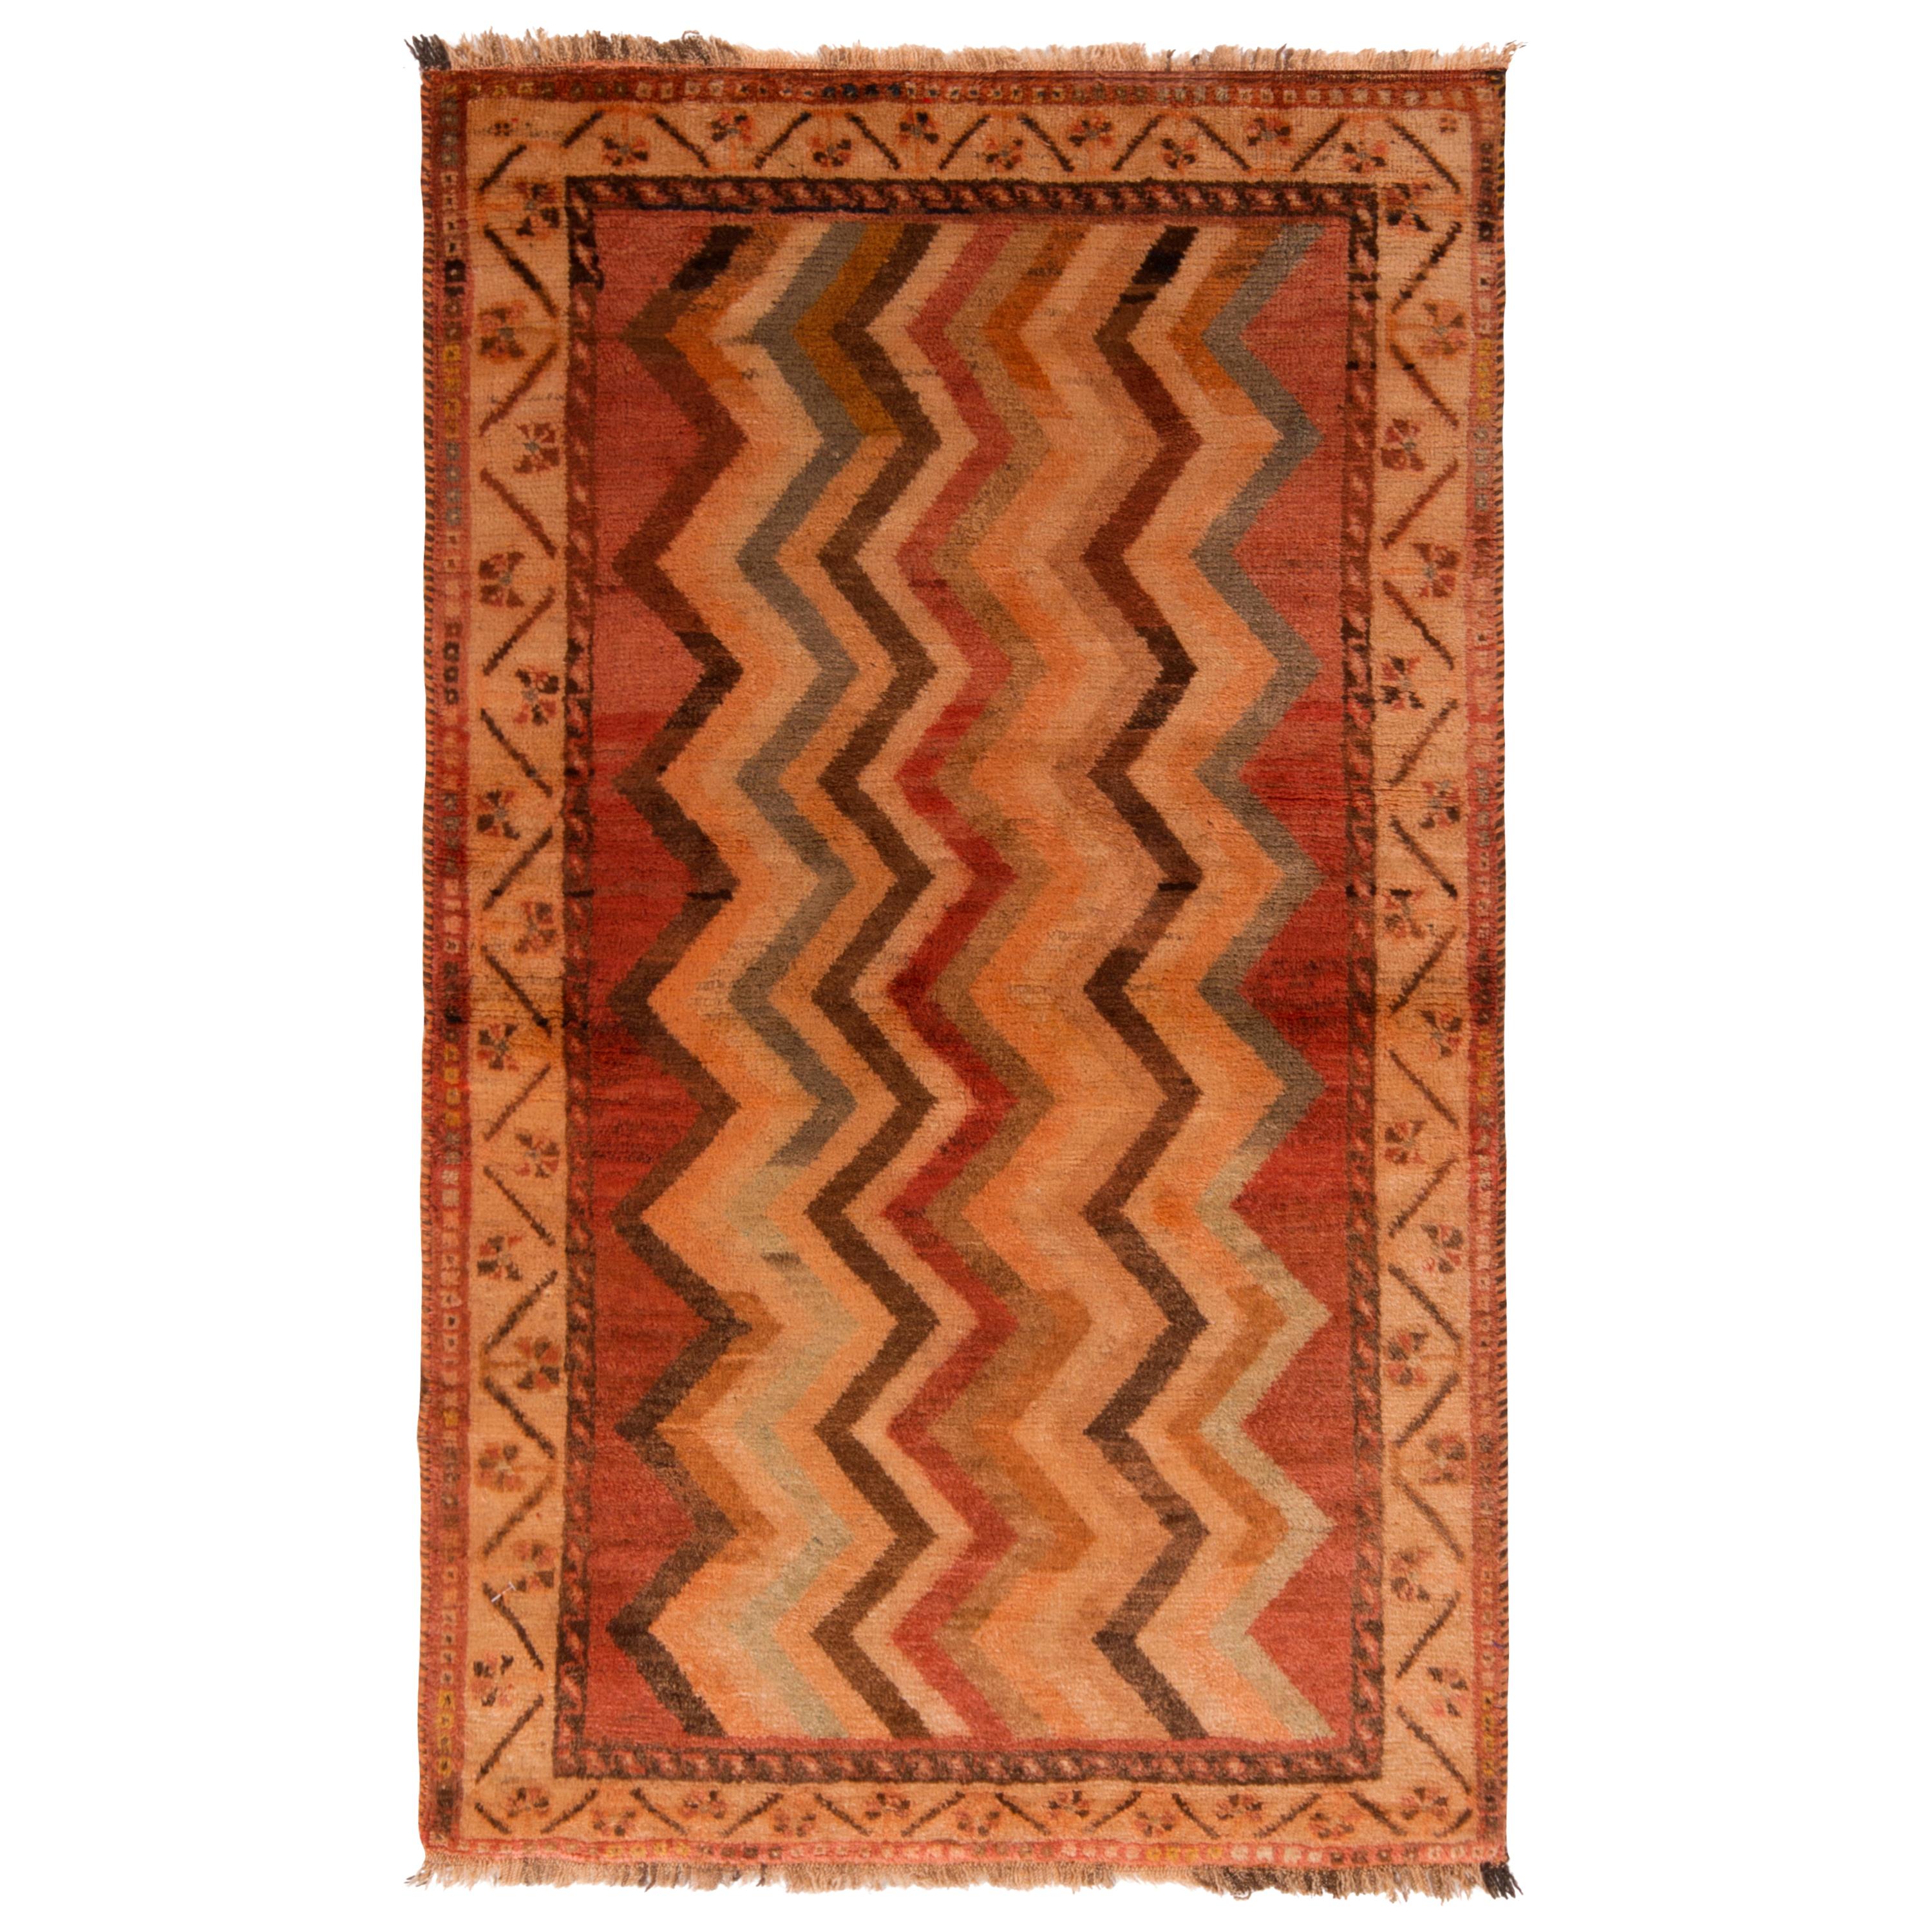 Antique Gabbeh Geometric Beige-Brown and Red Wool Persian Rug by Rug & Kilim For Sale